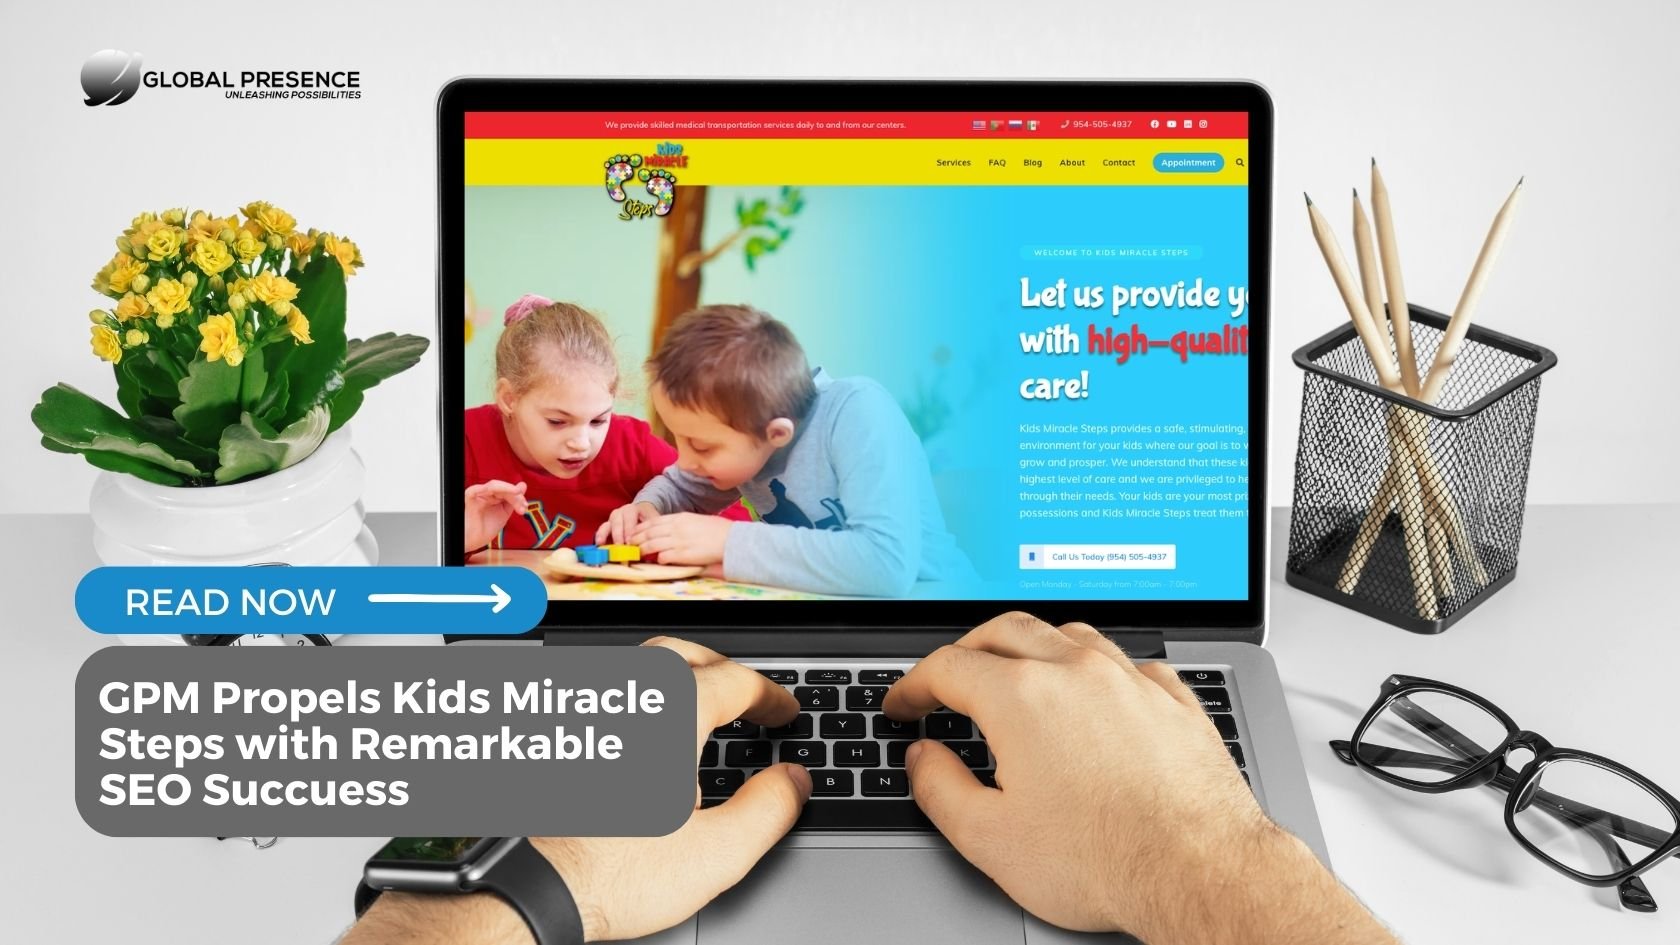 GPM Propels Kids Miracle Steps with Remarkable SEO Success